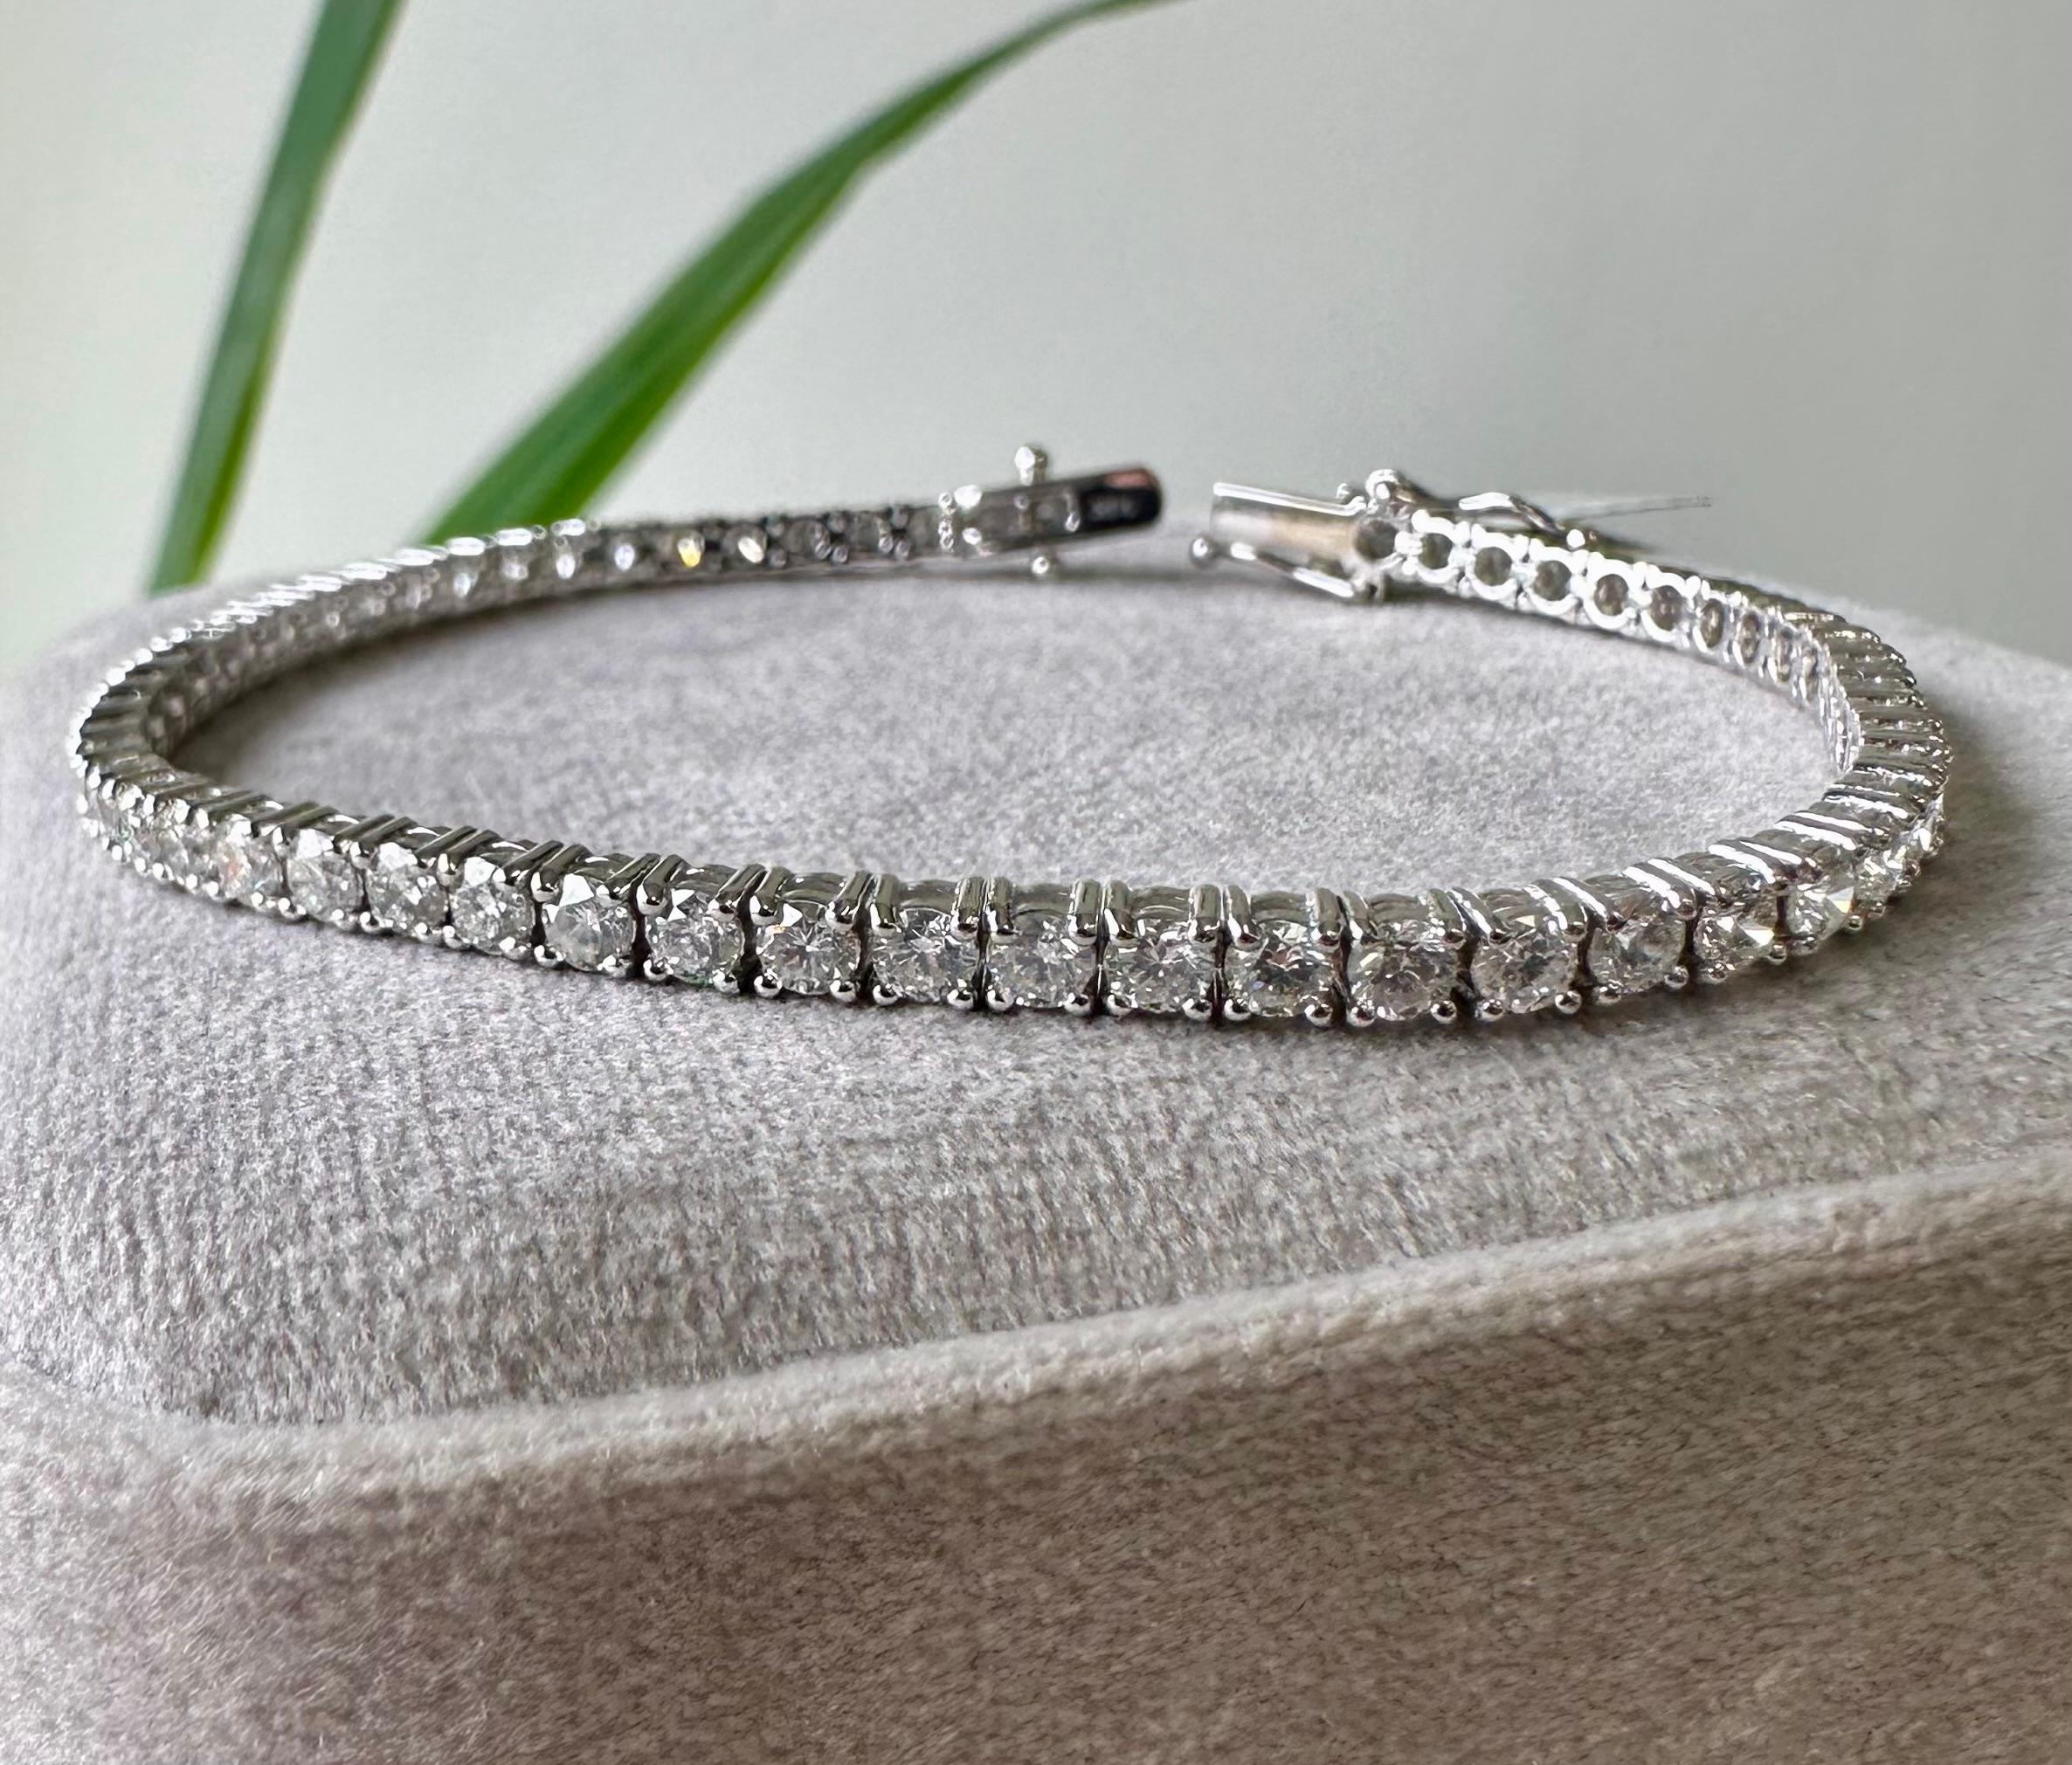 Great size for every day wear.
This tennis bracelet has 5 carat of natural G-H VS diamonds.
7